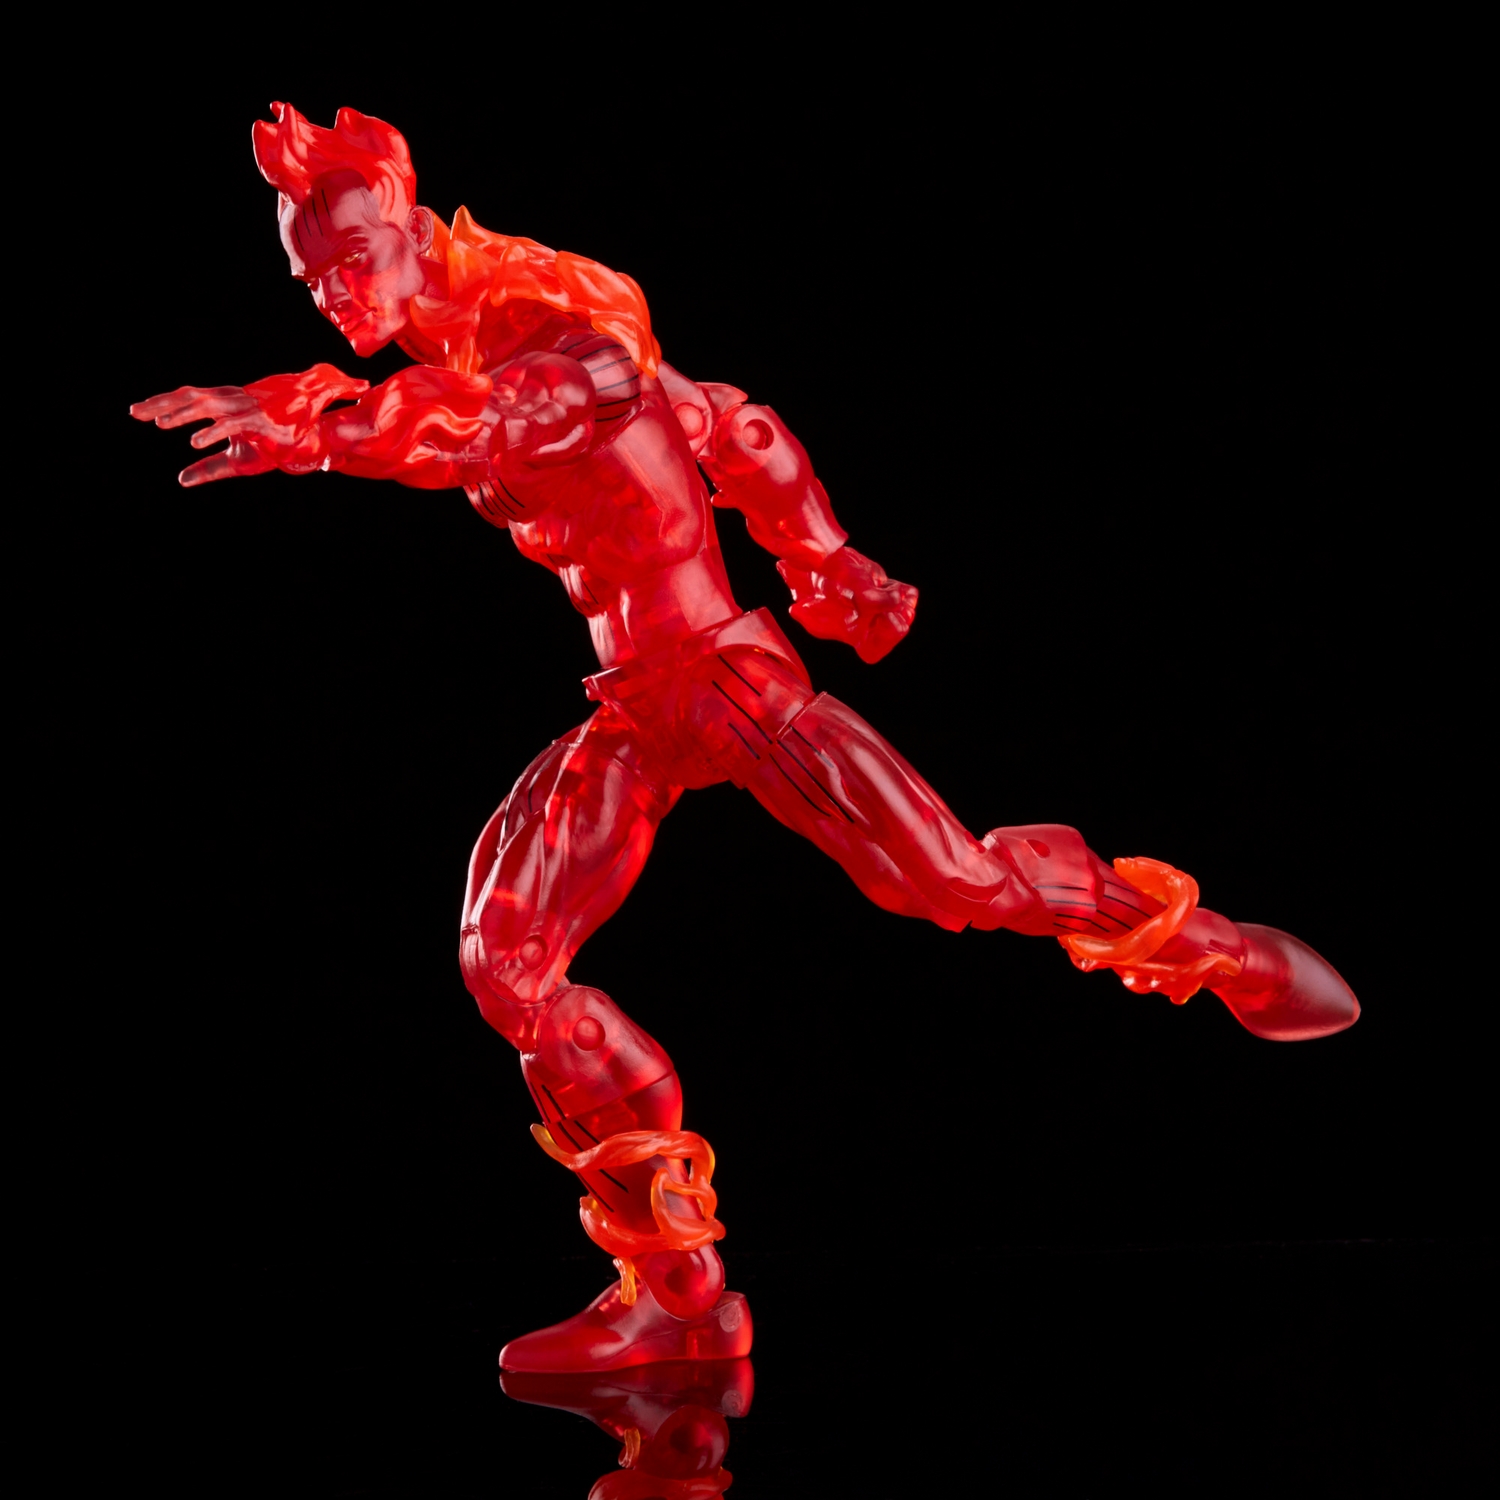 MARVEL LEGENDS SERIES 6-INCH RETRO FANTASTIC FOUR THE HUMAN TORCH Figure_oop 8.jpg